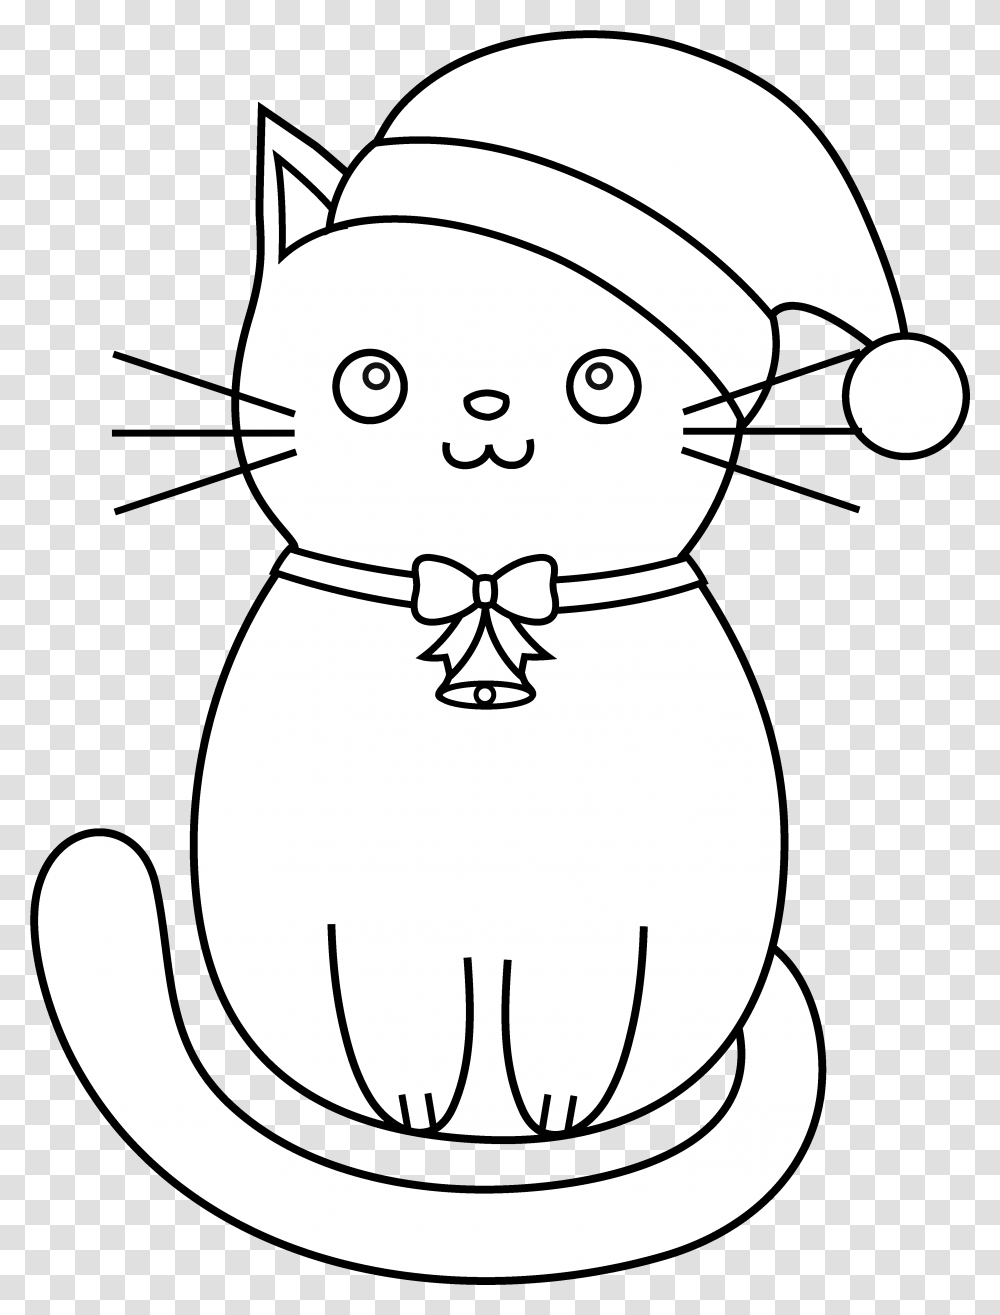 Christmas Cat Line Art Christmas Kitty Coloring Pages, Chef, Snowman, Winter, Outdoors Transparent Png